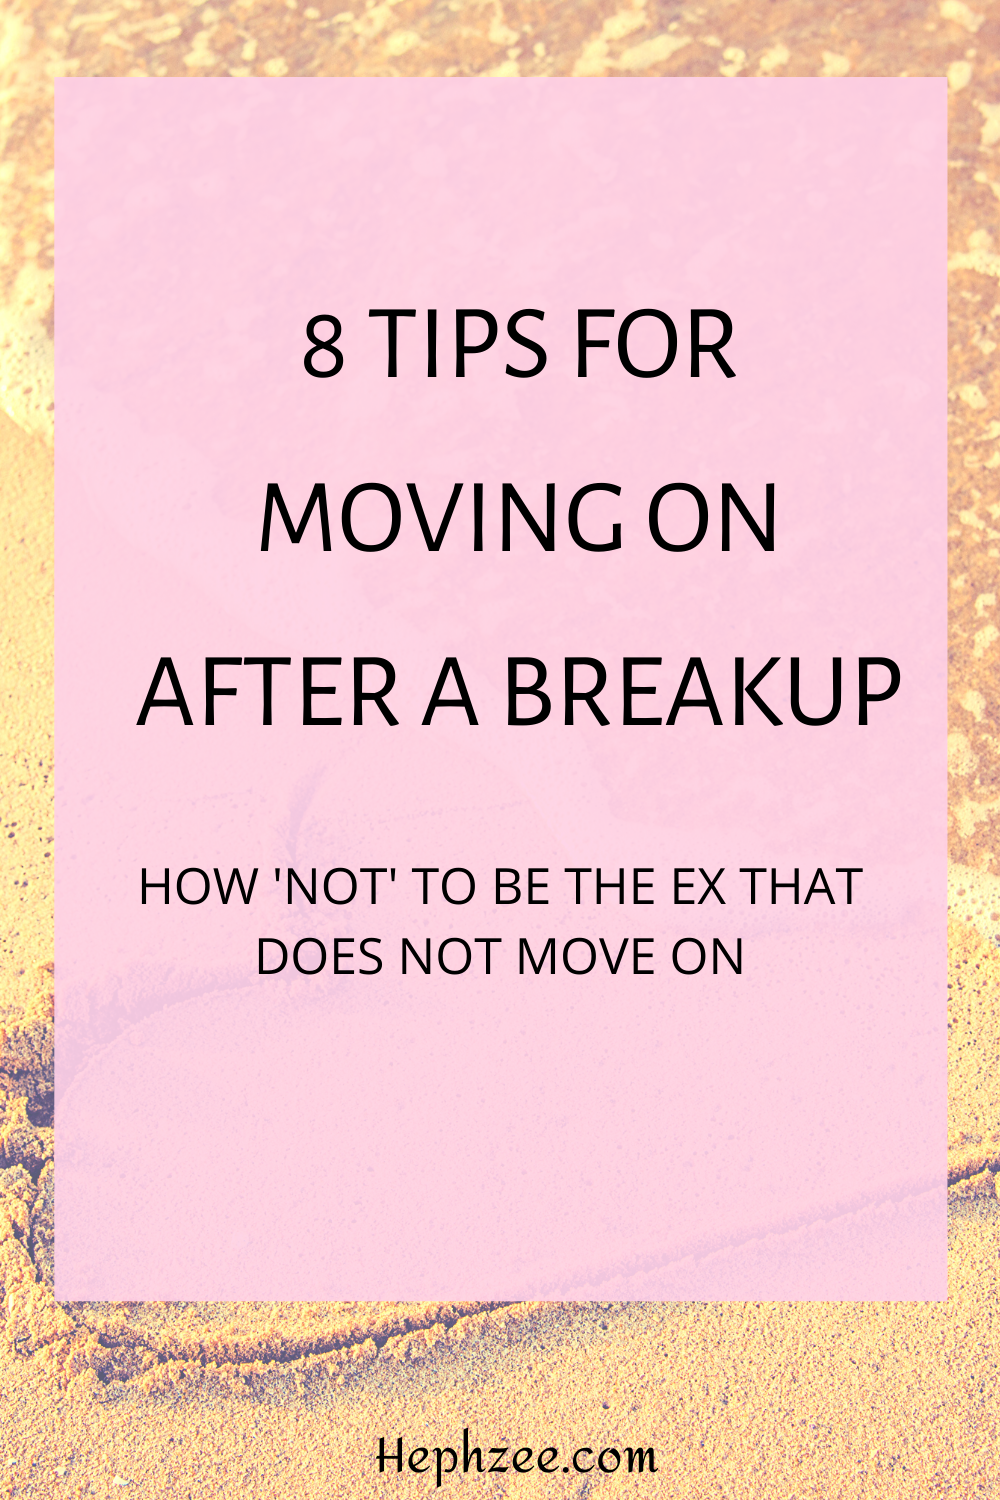 Moving on after a breakup